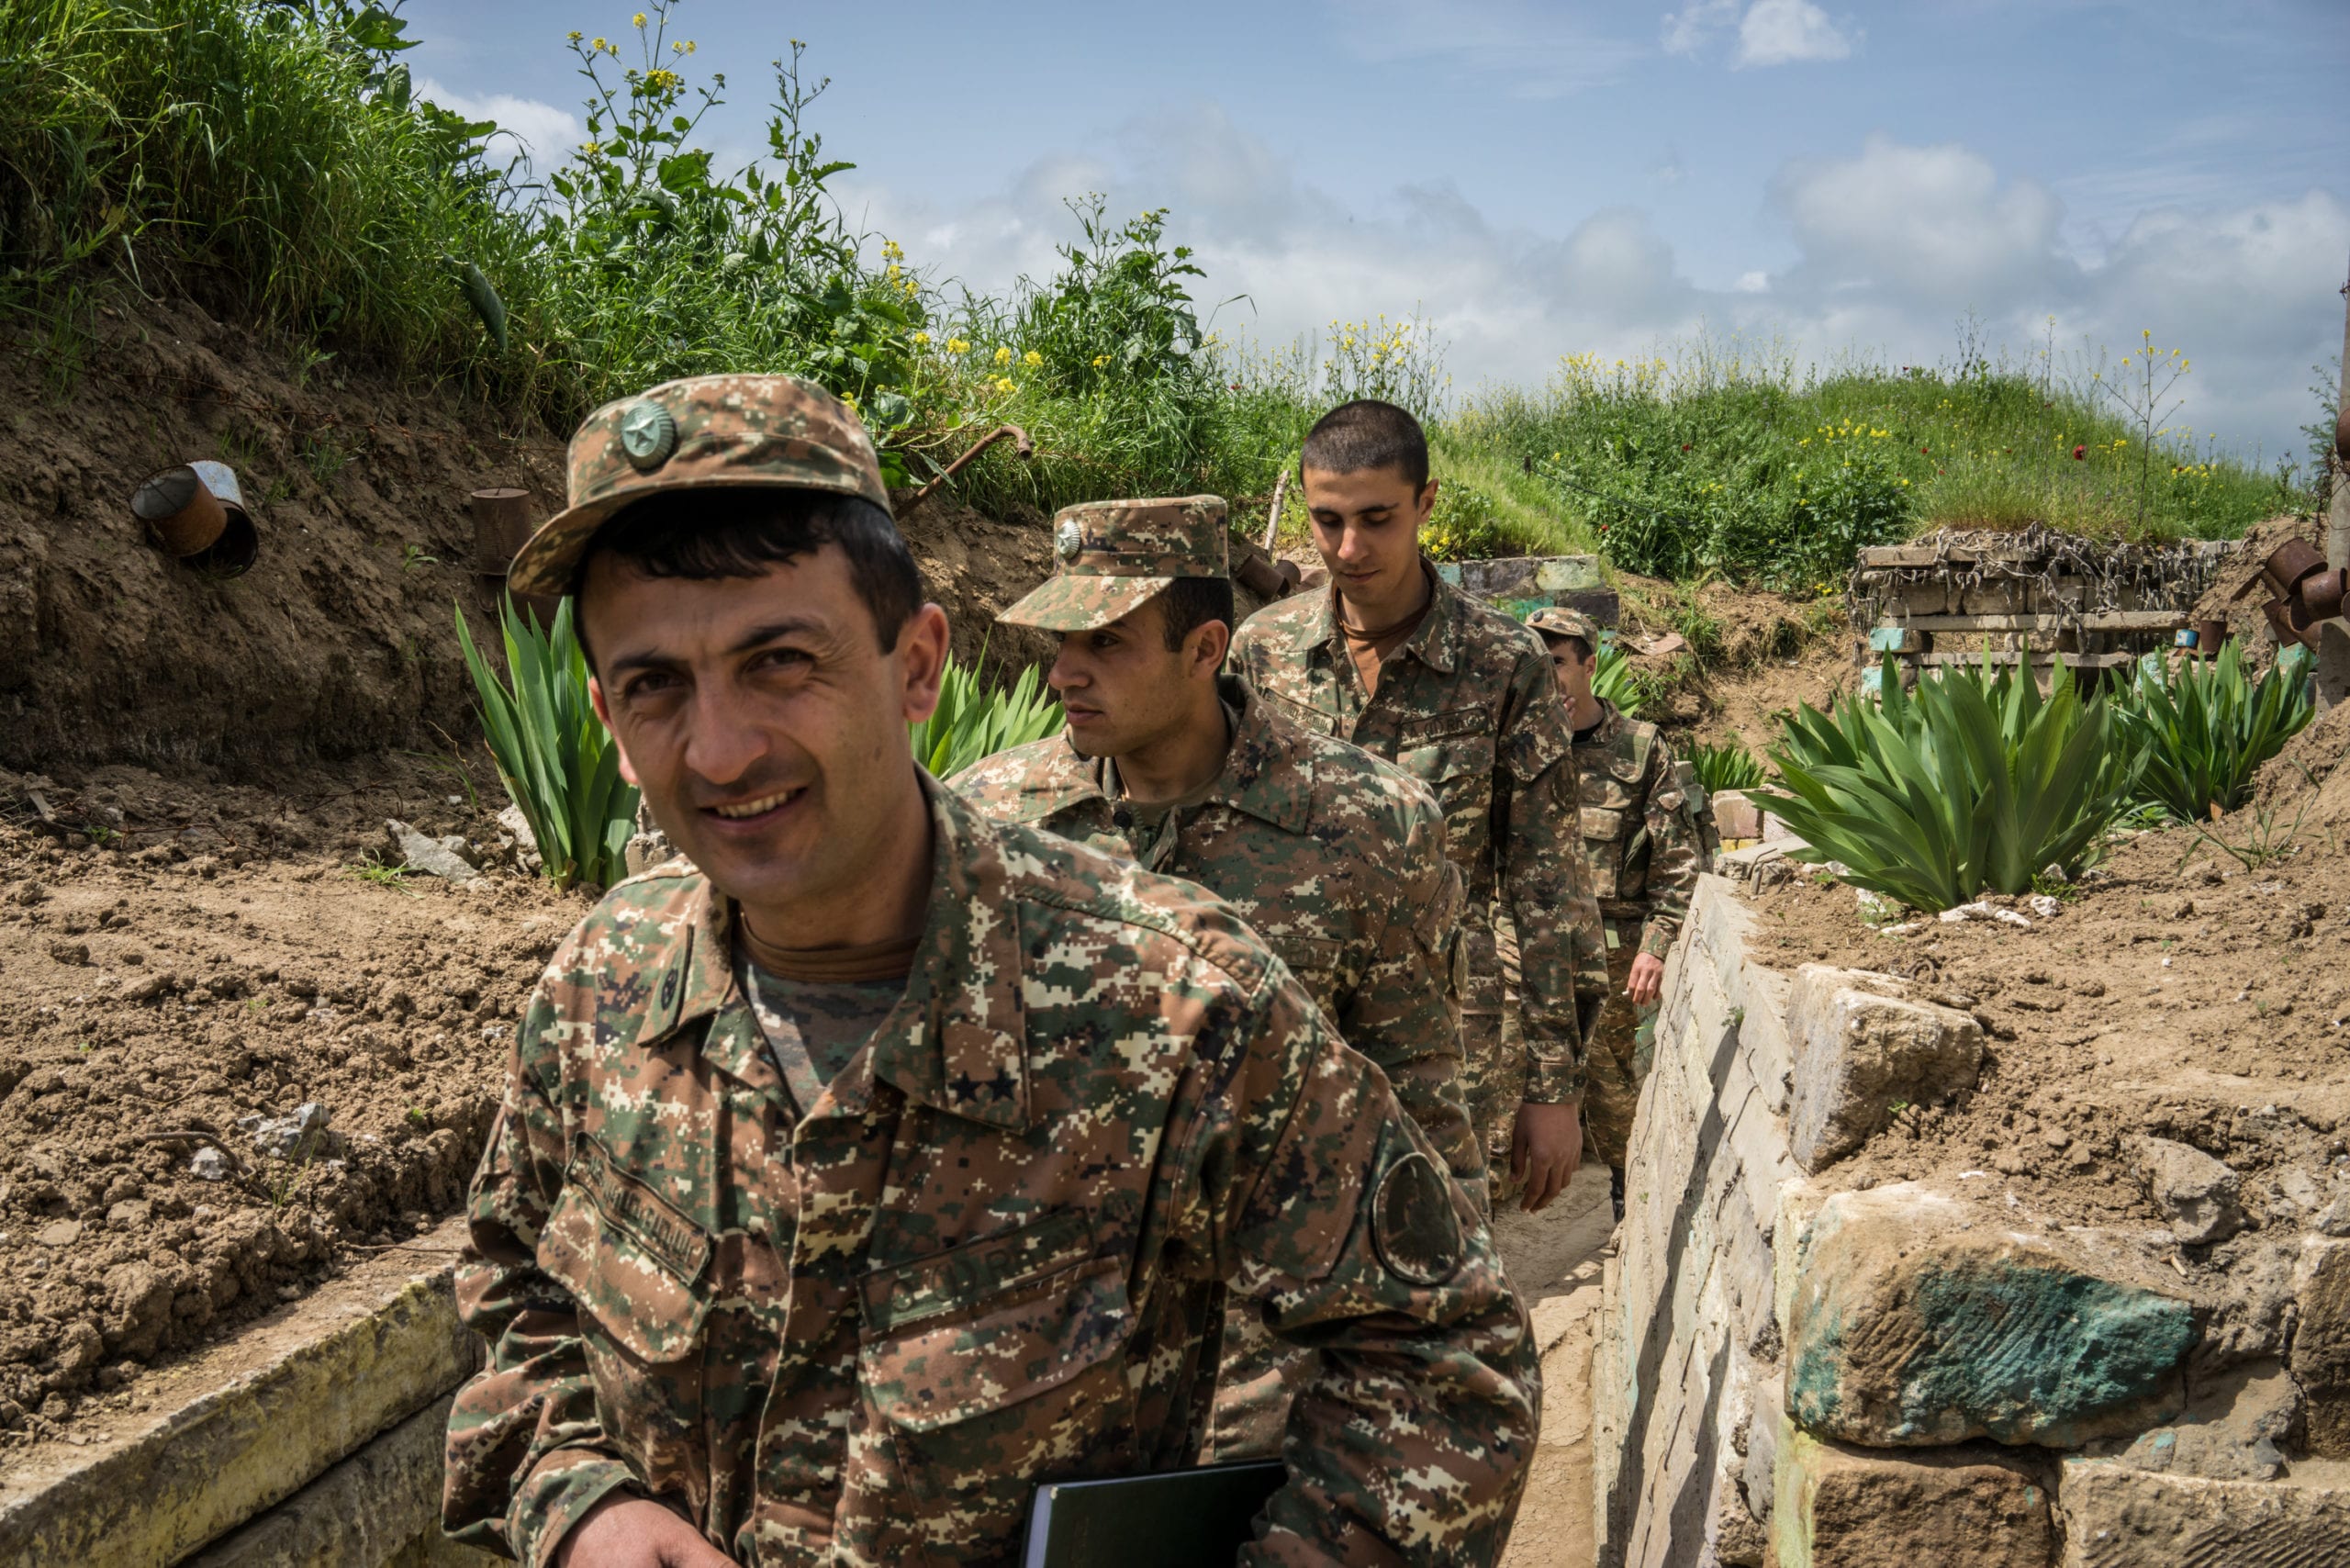 Members of the armed forces of Nagorno-Karabakh at their post along the line of contact with Azerbaijani forces on 21 April 2015 [Brendan Hoffman/Getty Images]